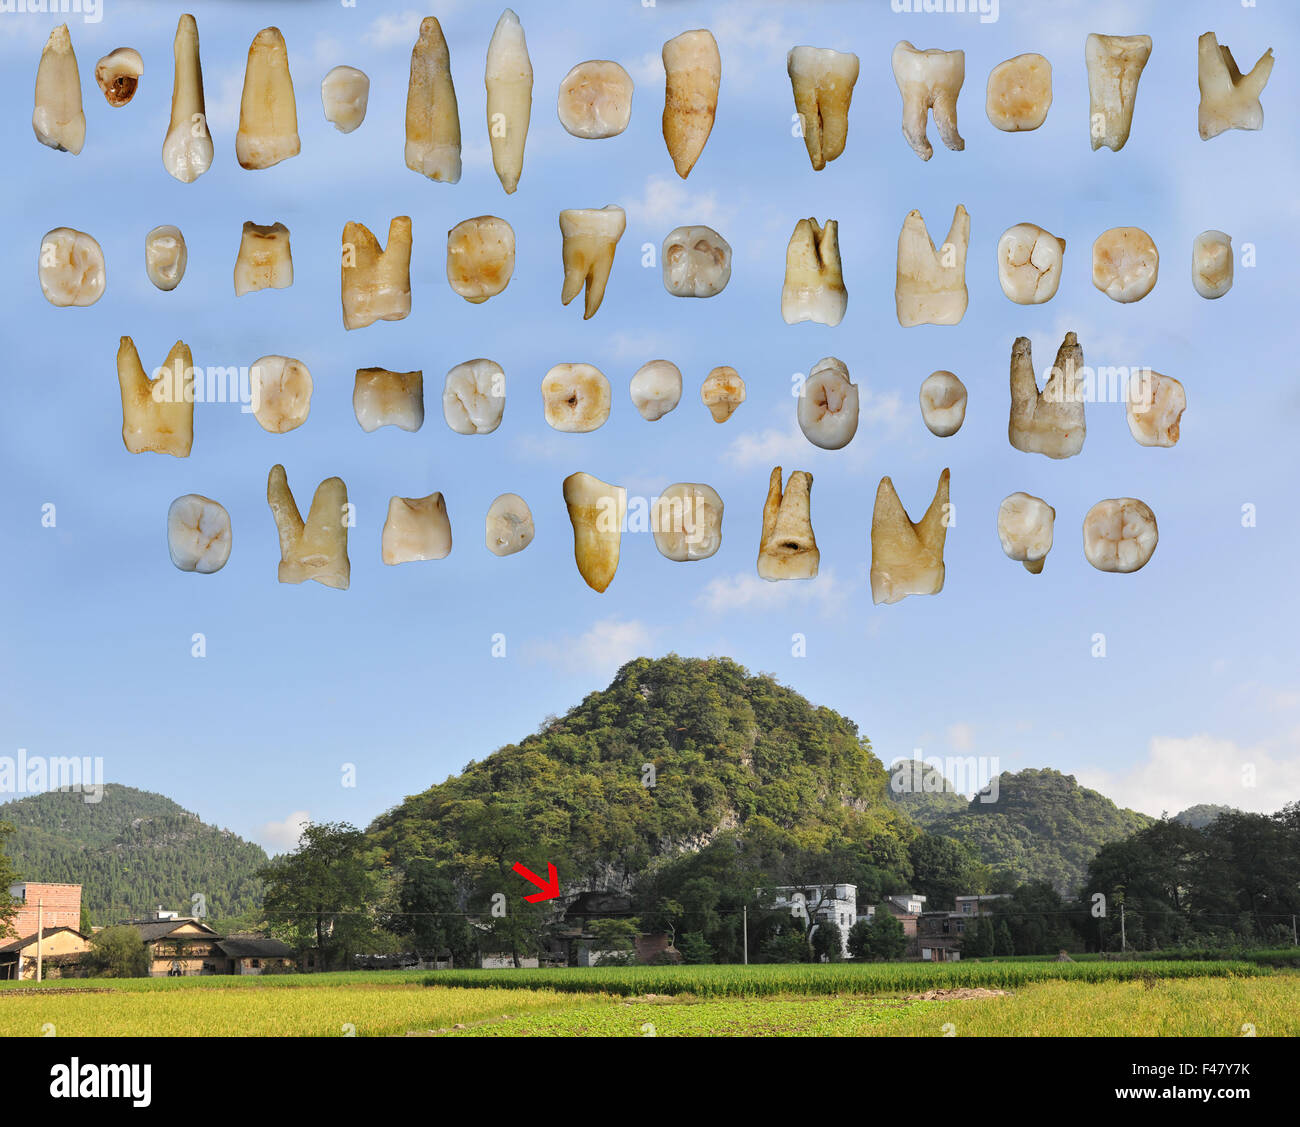 (151015) -- BEIJING, Oct. 15, 2015 (Xinhua) -- This composite graph provided by the Institute of Vertebrate Paleontology and Paleoanthropology under the Chinese Academy of Sciences shows tooth fossils found in Daoxian County in central China's Hunan Province. These tooth fossils indicate the early form of modern homo sapiens appeared in the region more than 80,000 years ago. The 47 fossils, found in Daoxian county, date back from 80,000 to 120,000 years and are believed to be the oldest remains of a completely modern form scientists have known in the east Asia region, the study's leading scien Stock Photo